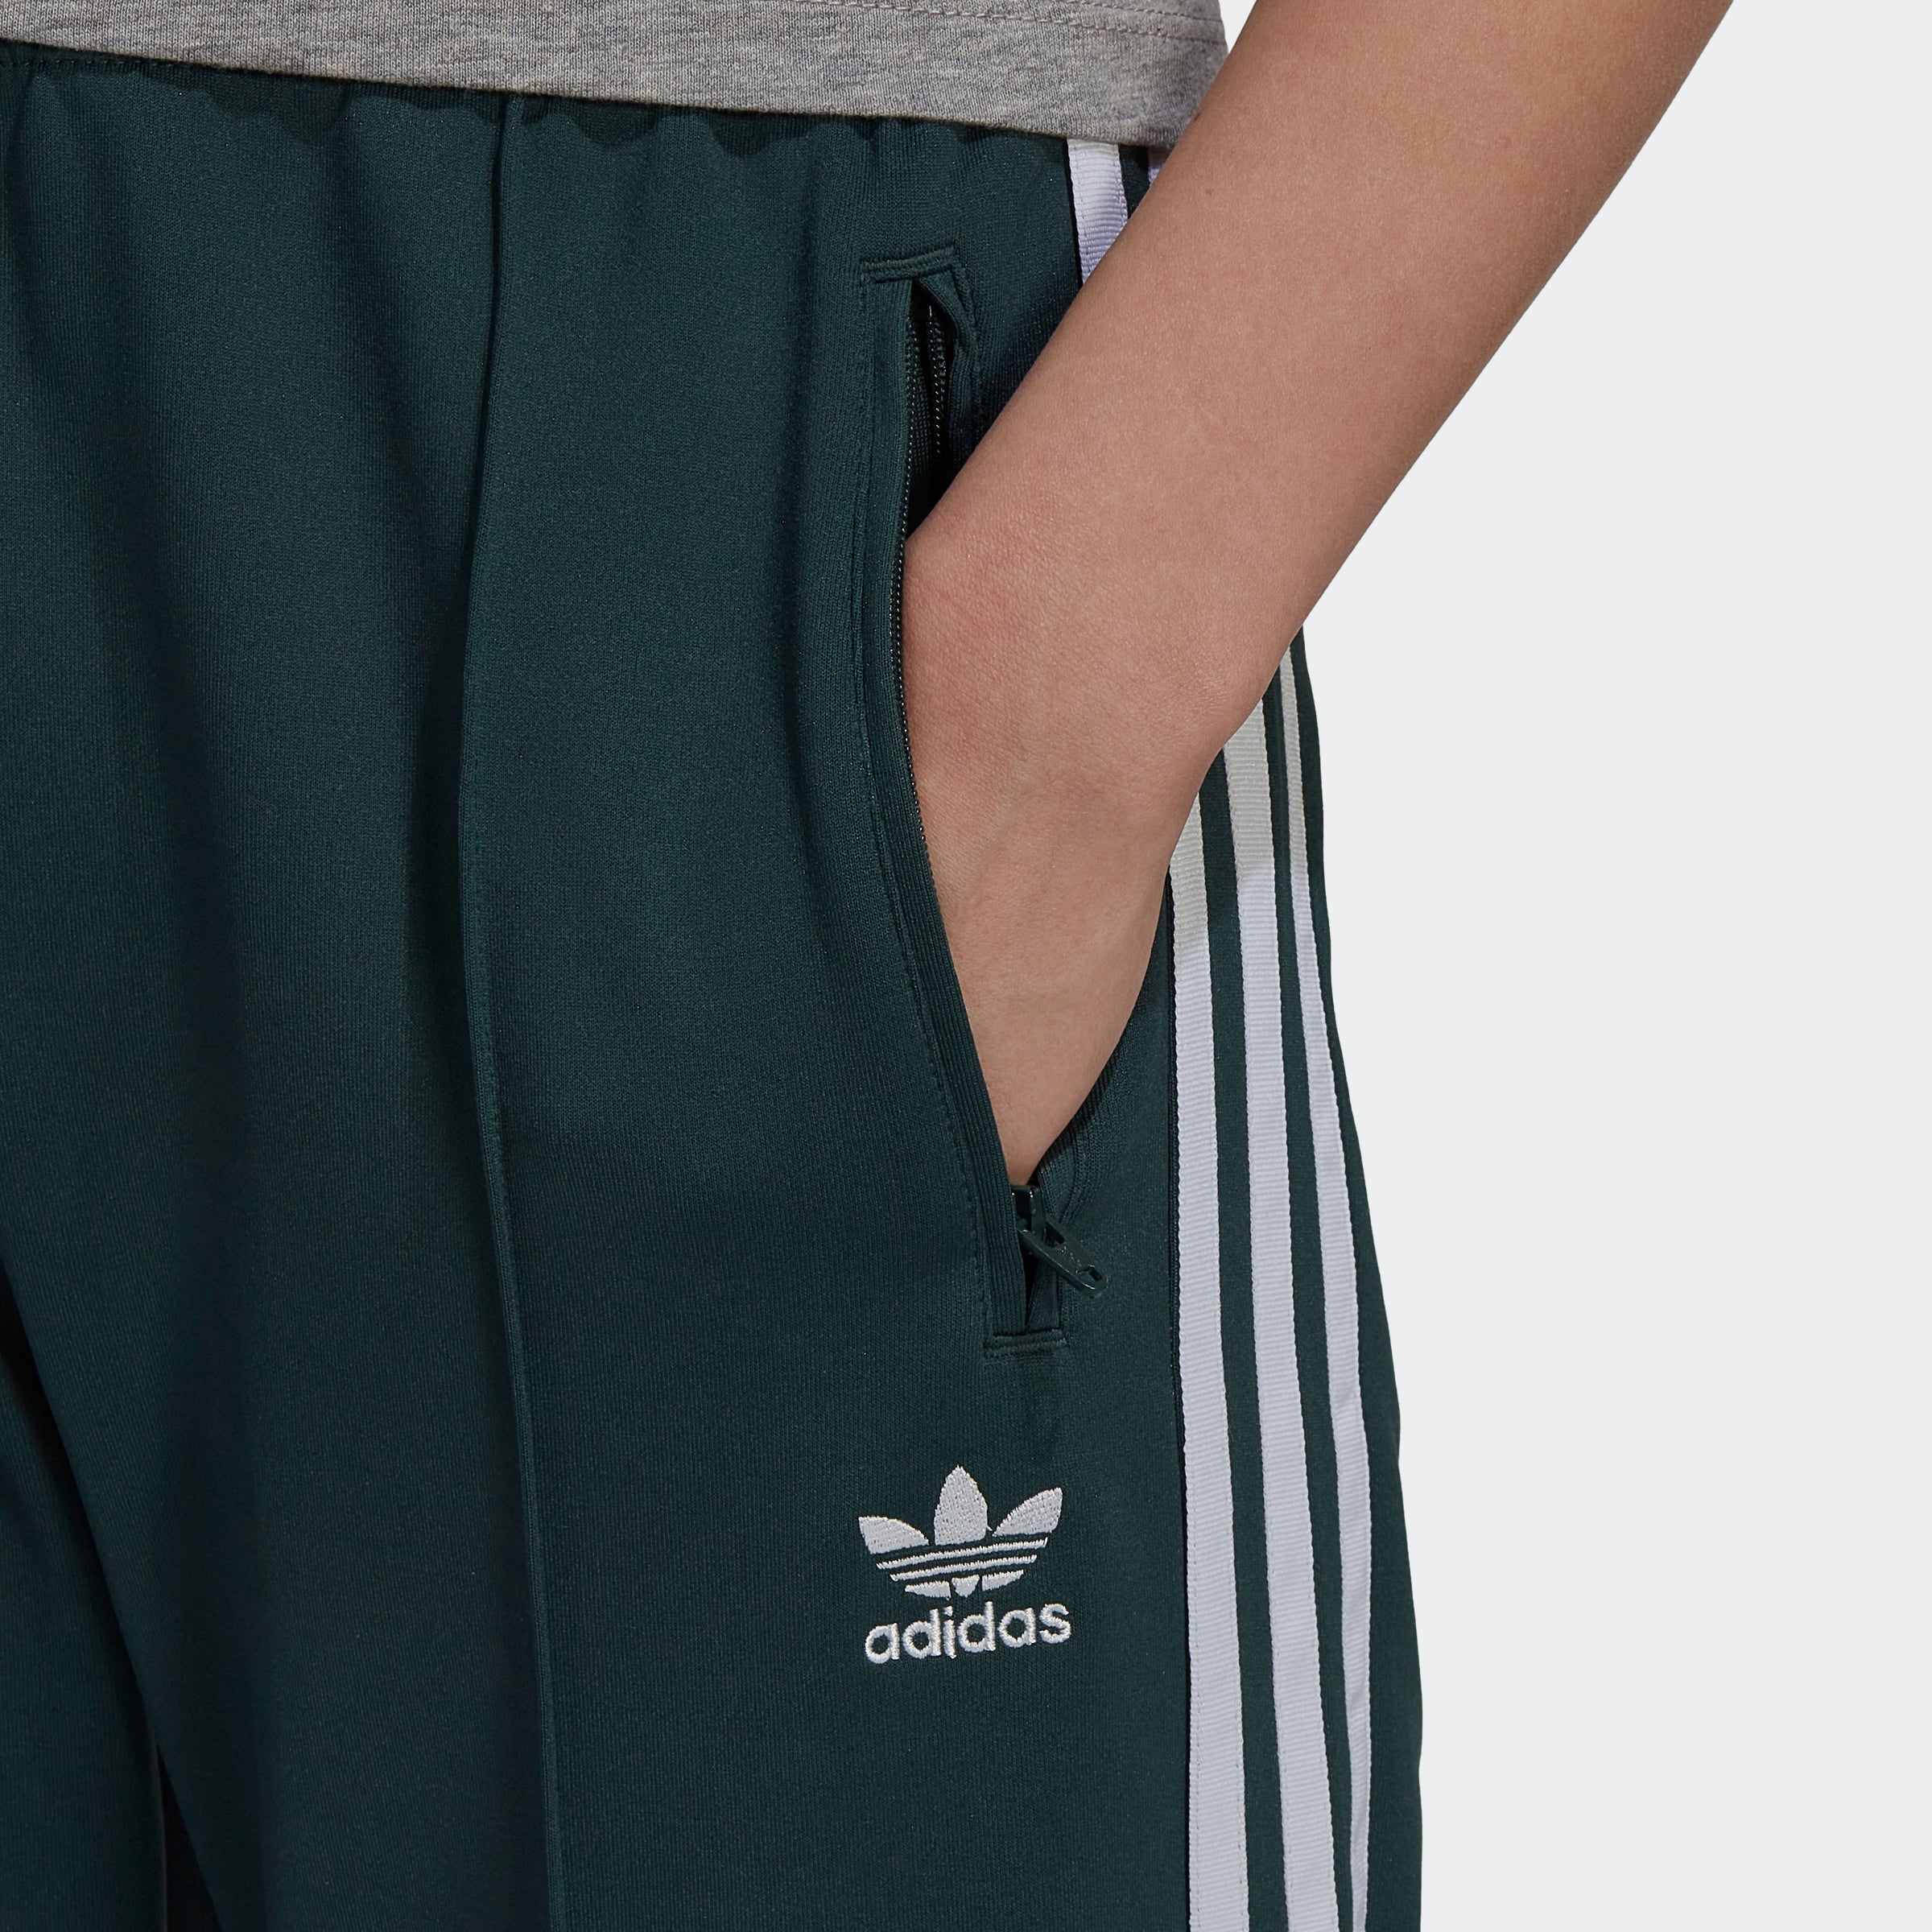 Women\'s adidas Sports | Chicago Track SST Pants Mineral Green City